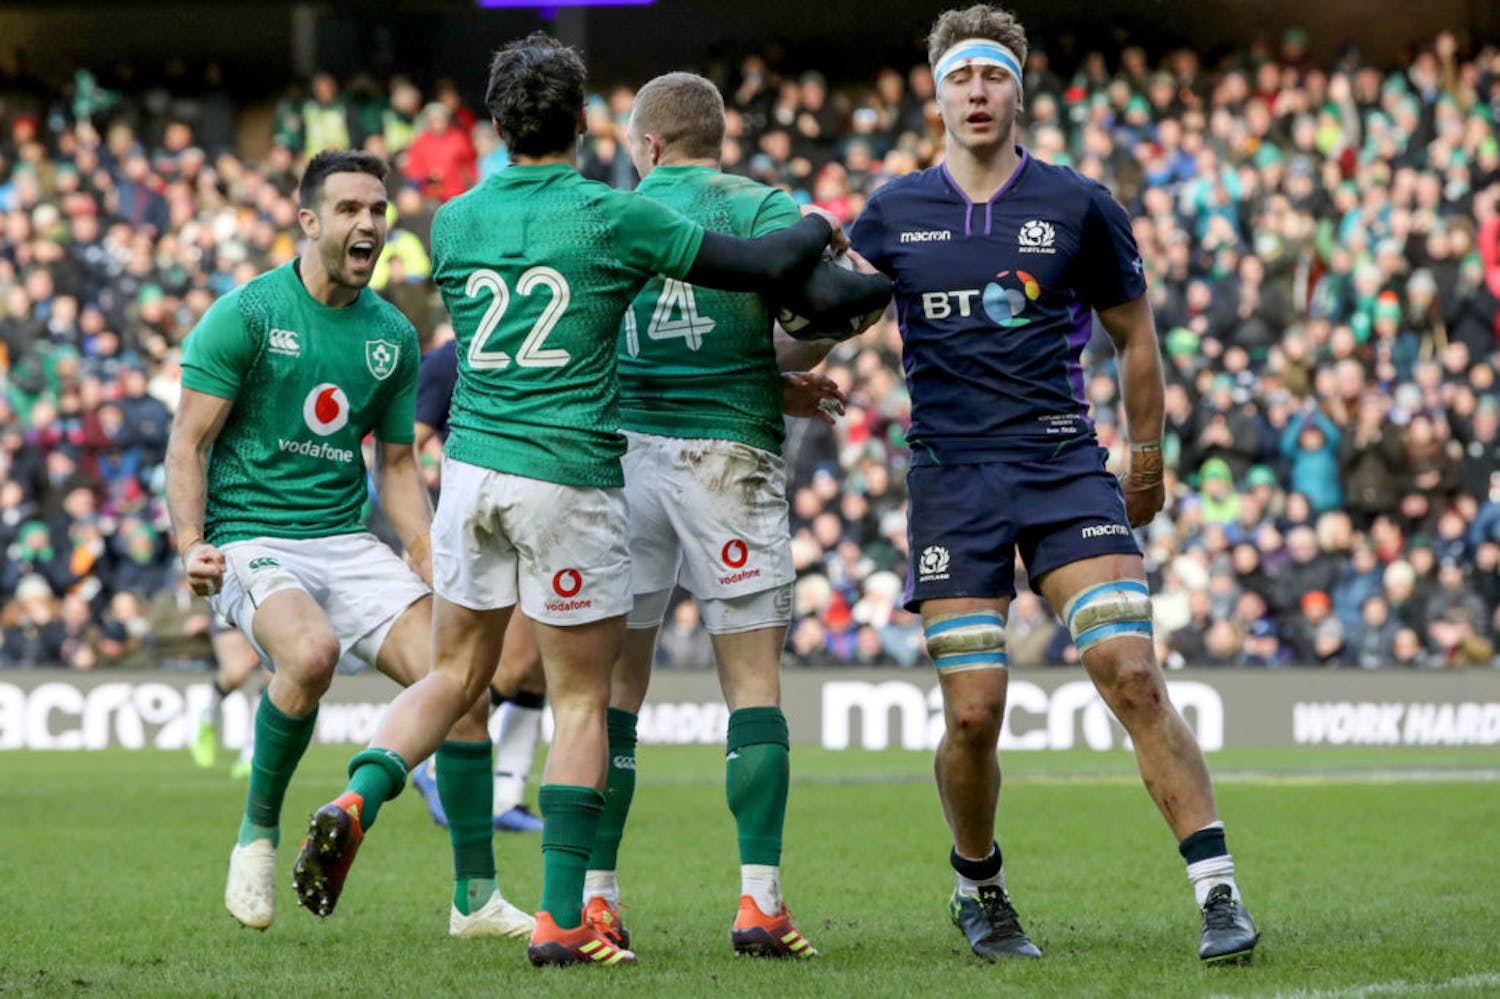 Scotland v Ireland 6 Nations Reaction: Murphy and Dunne